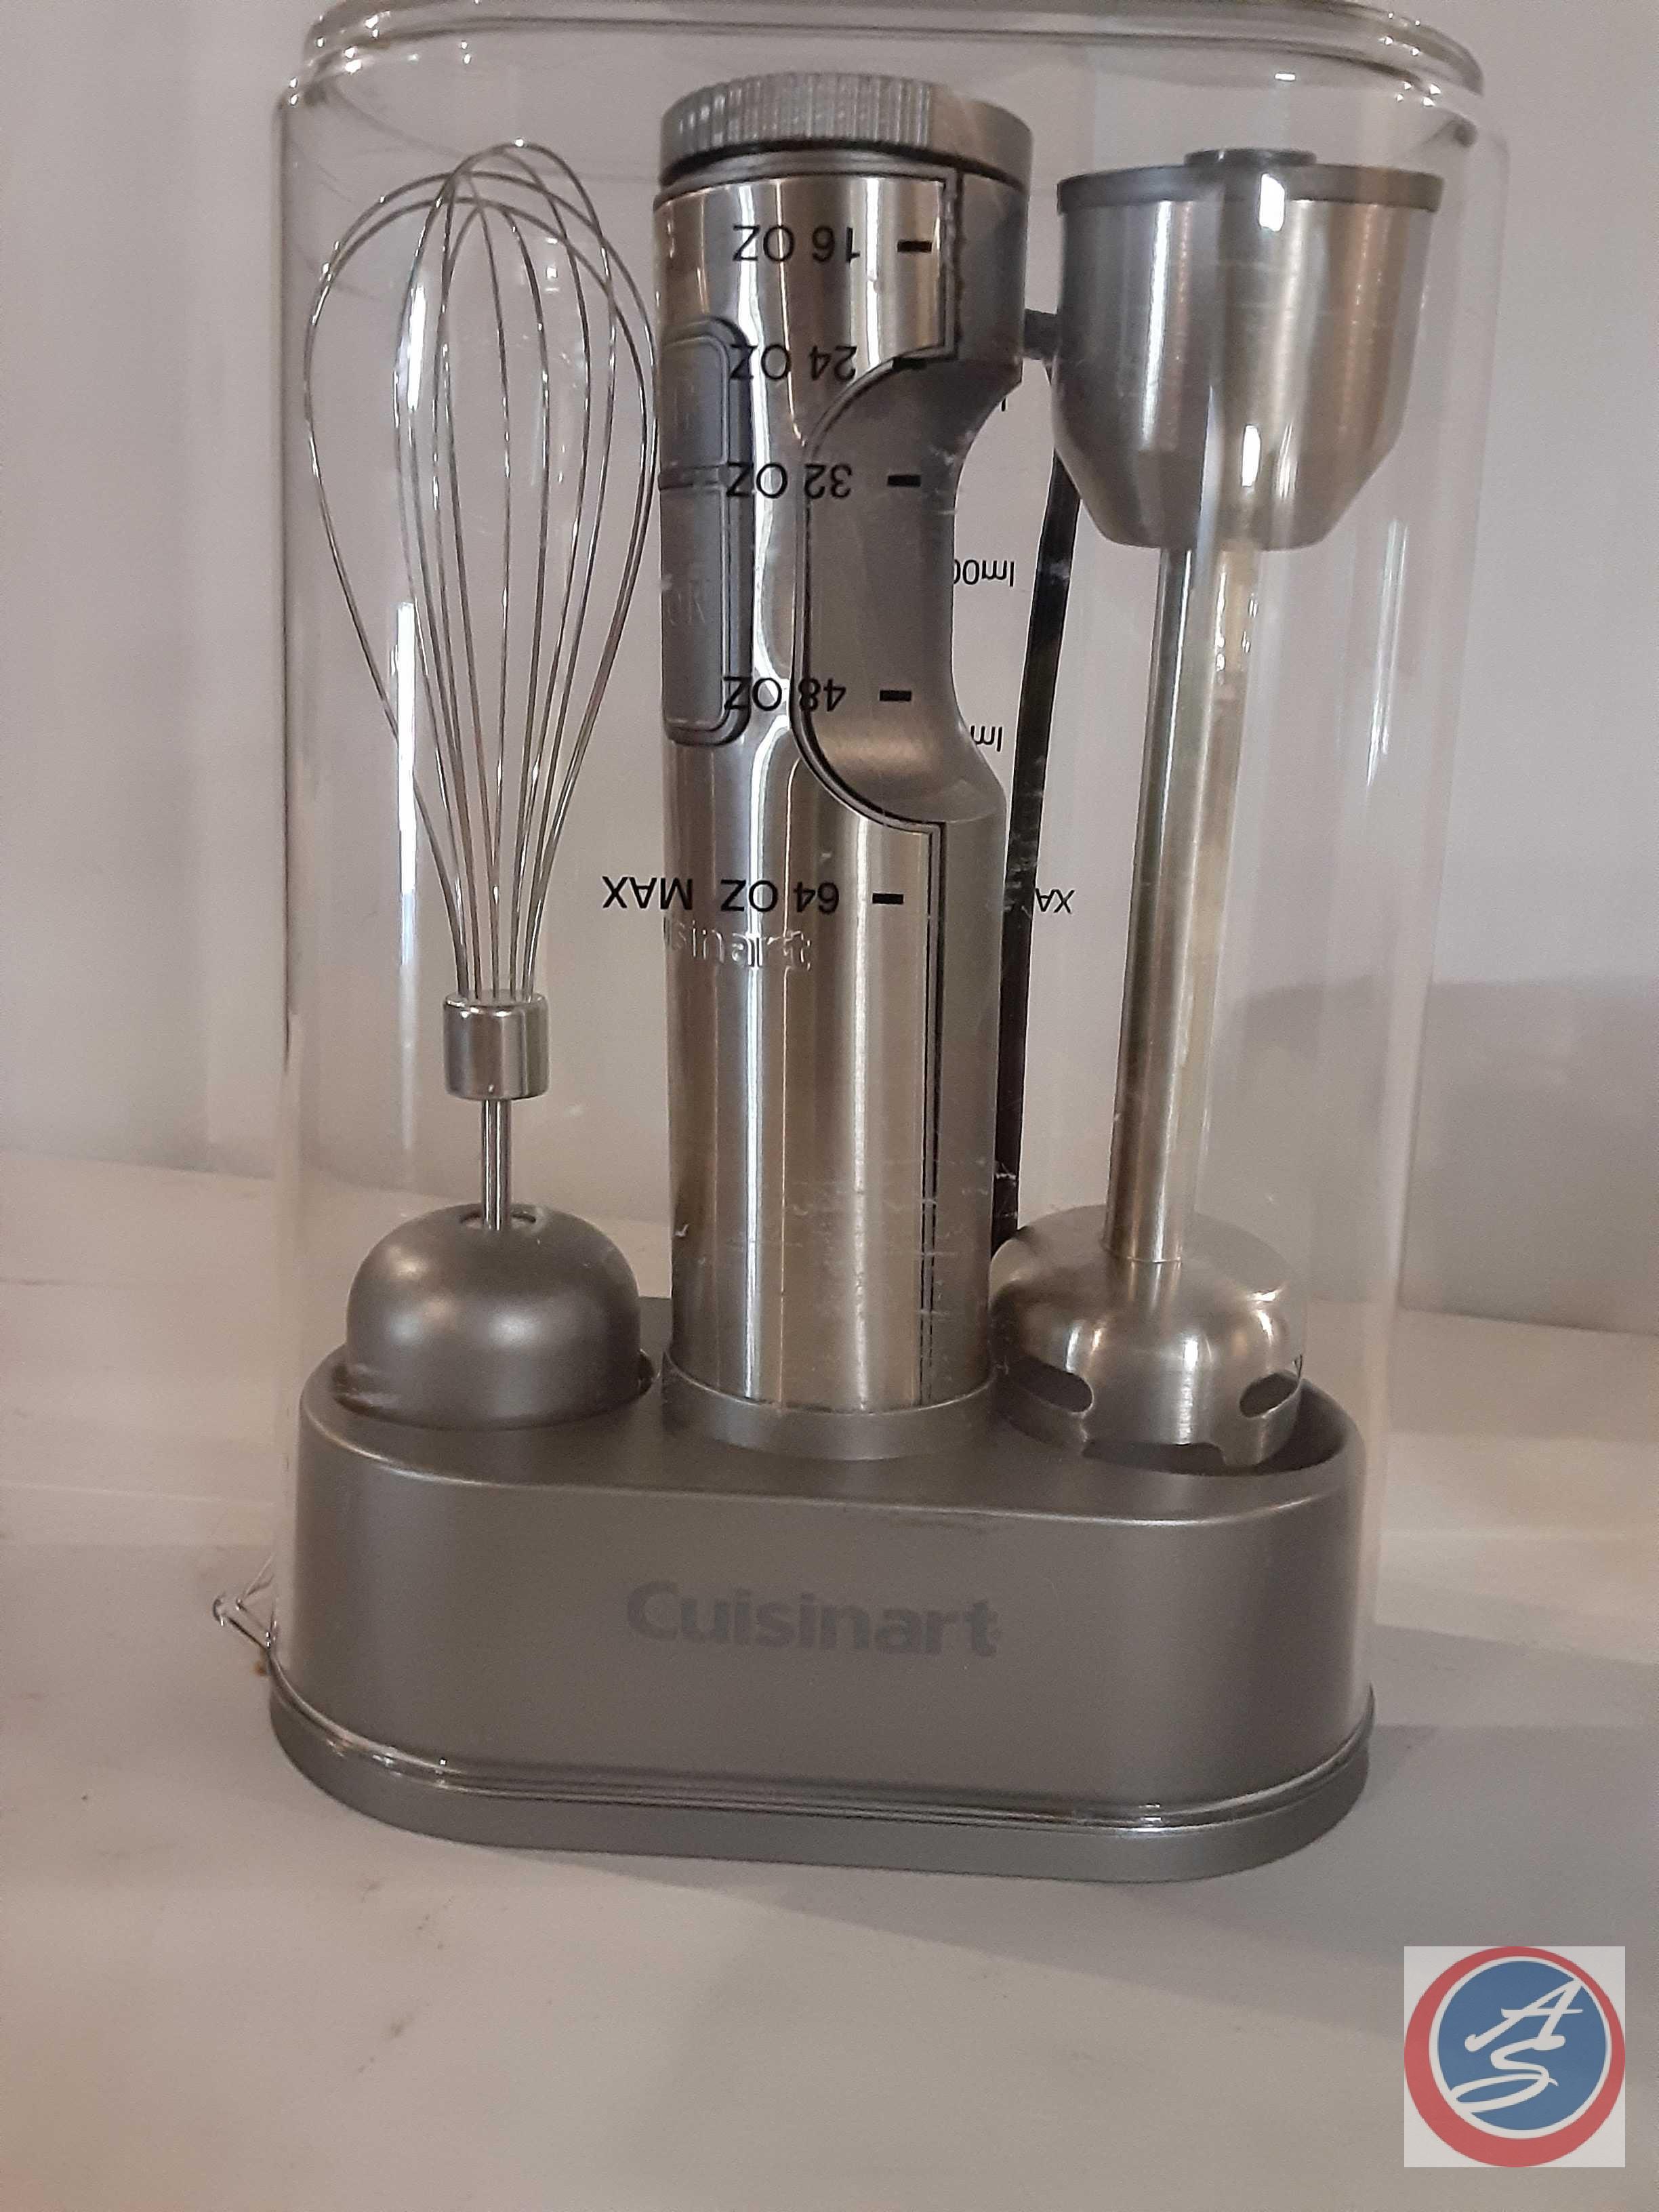 1) Cuisinart blender, and a Milk Frother, and a